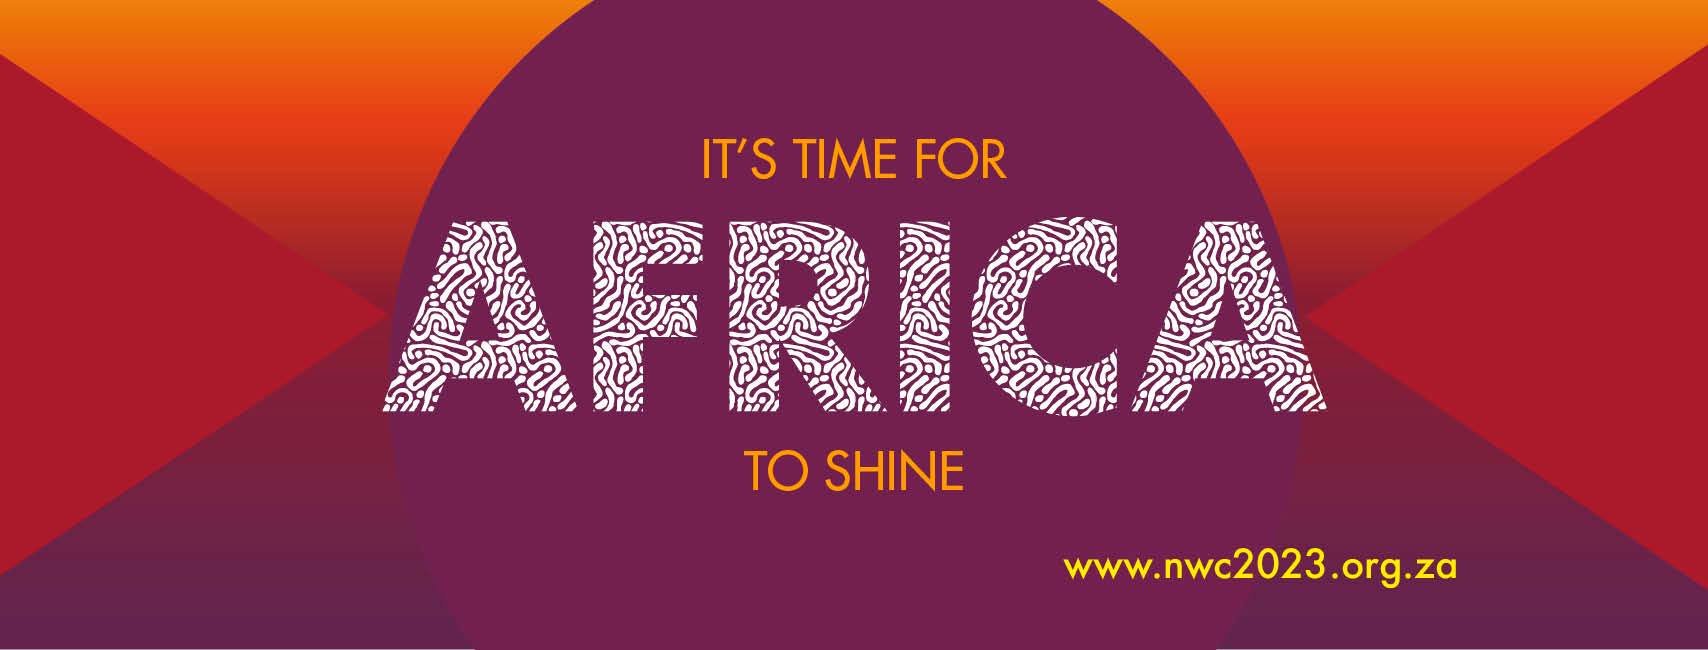 Africas-time-to-shine